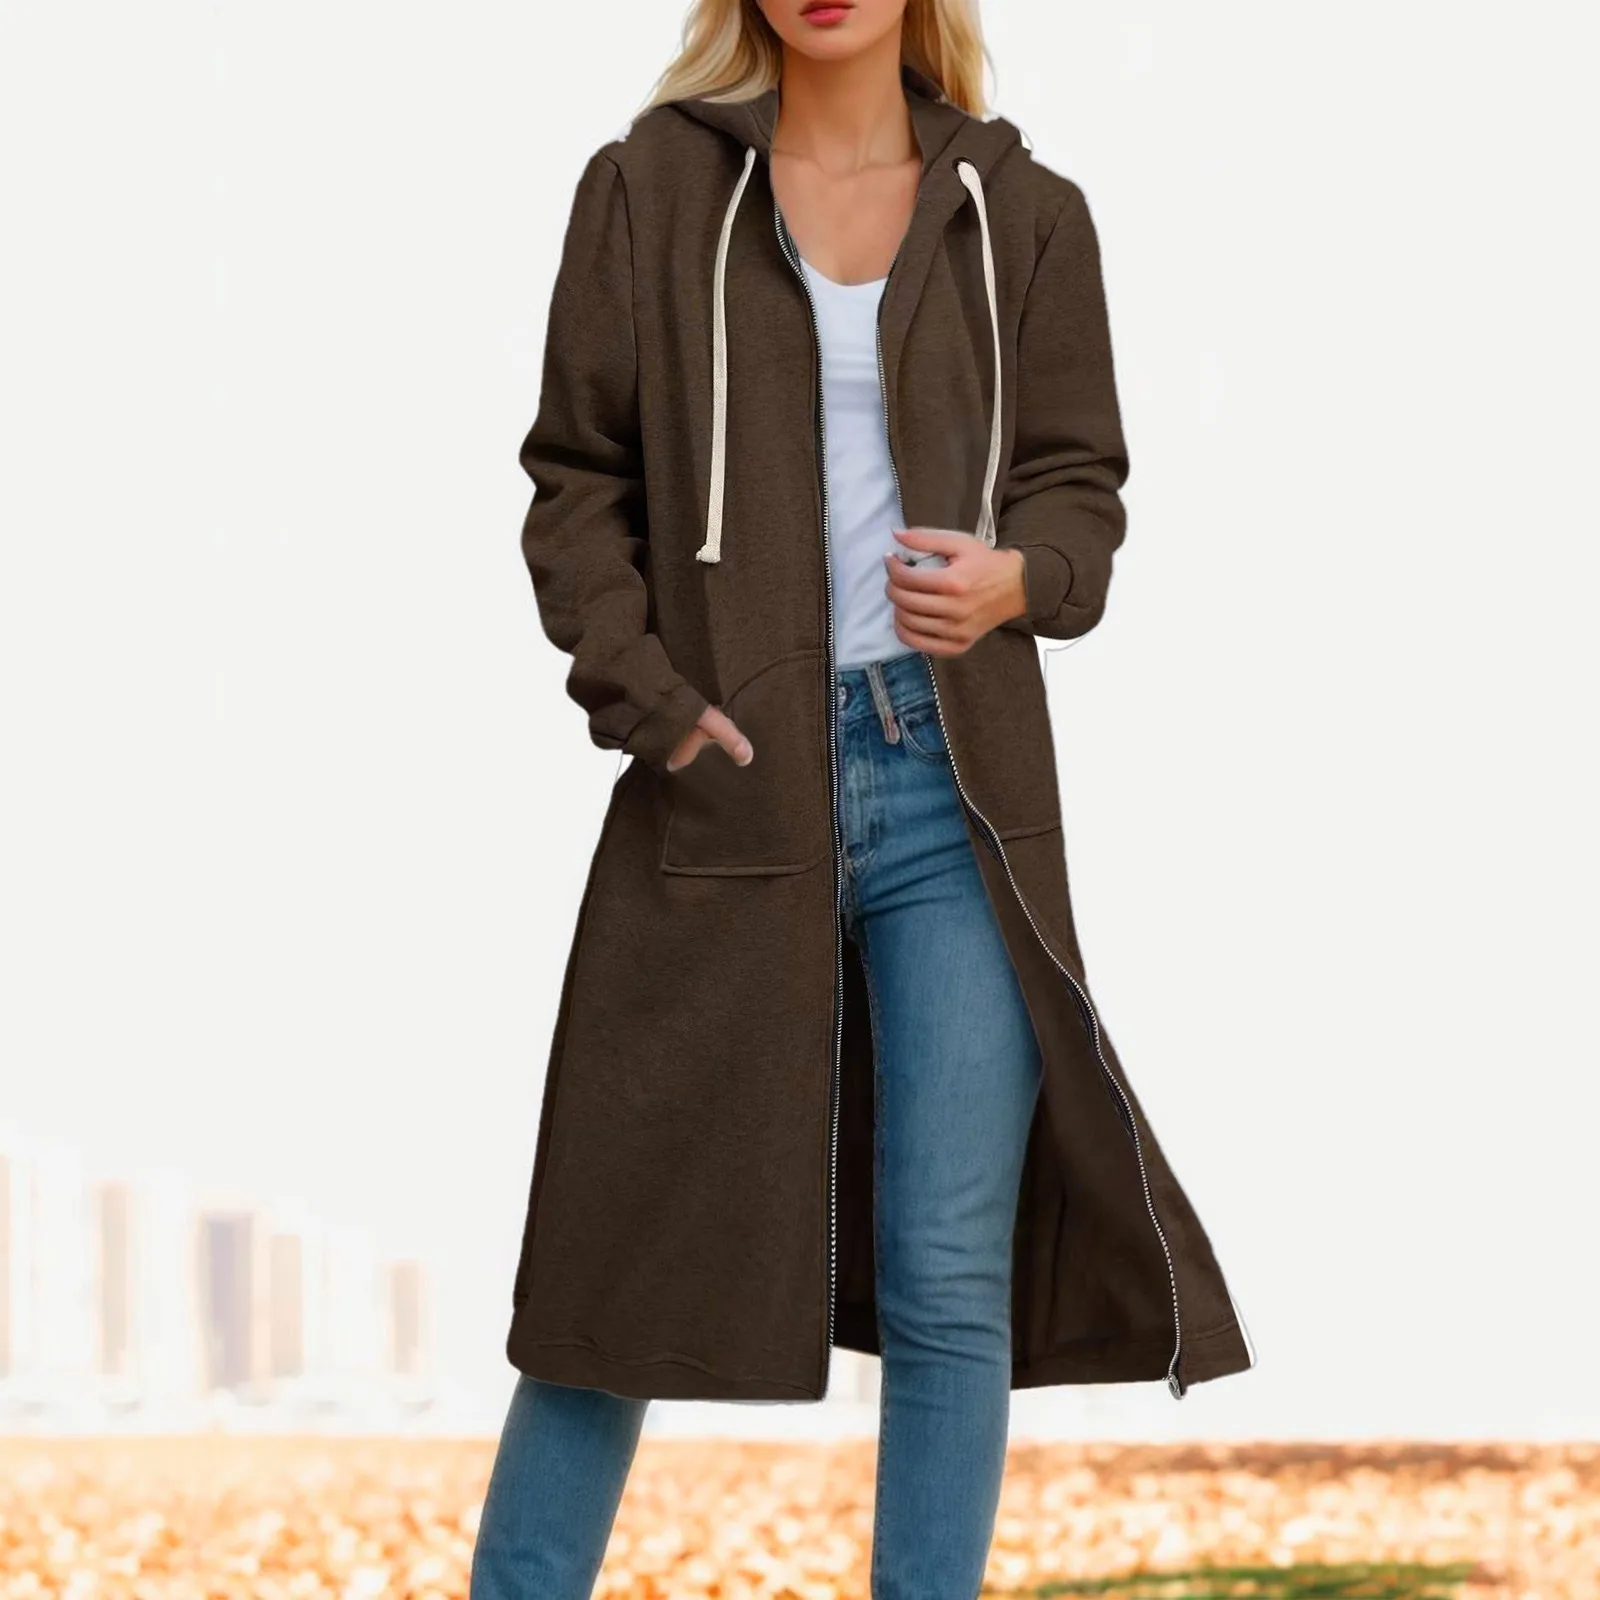 

Autumn Winter Casual Women Trench Coat Loose Long Sleeves Long Hoodies Hooded Zip Up Jacket Oversized Winter Coat Outerwears